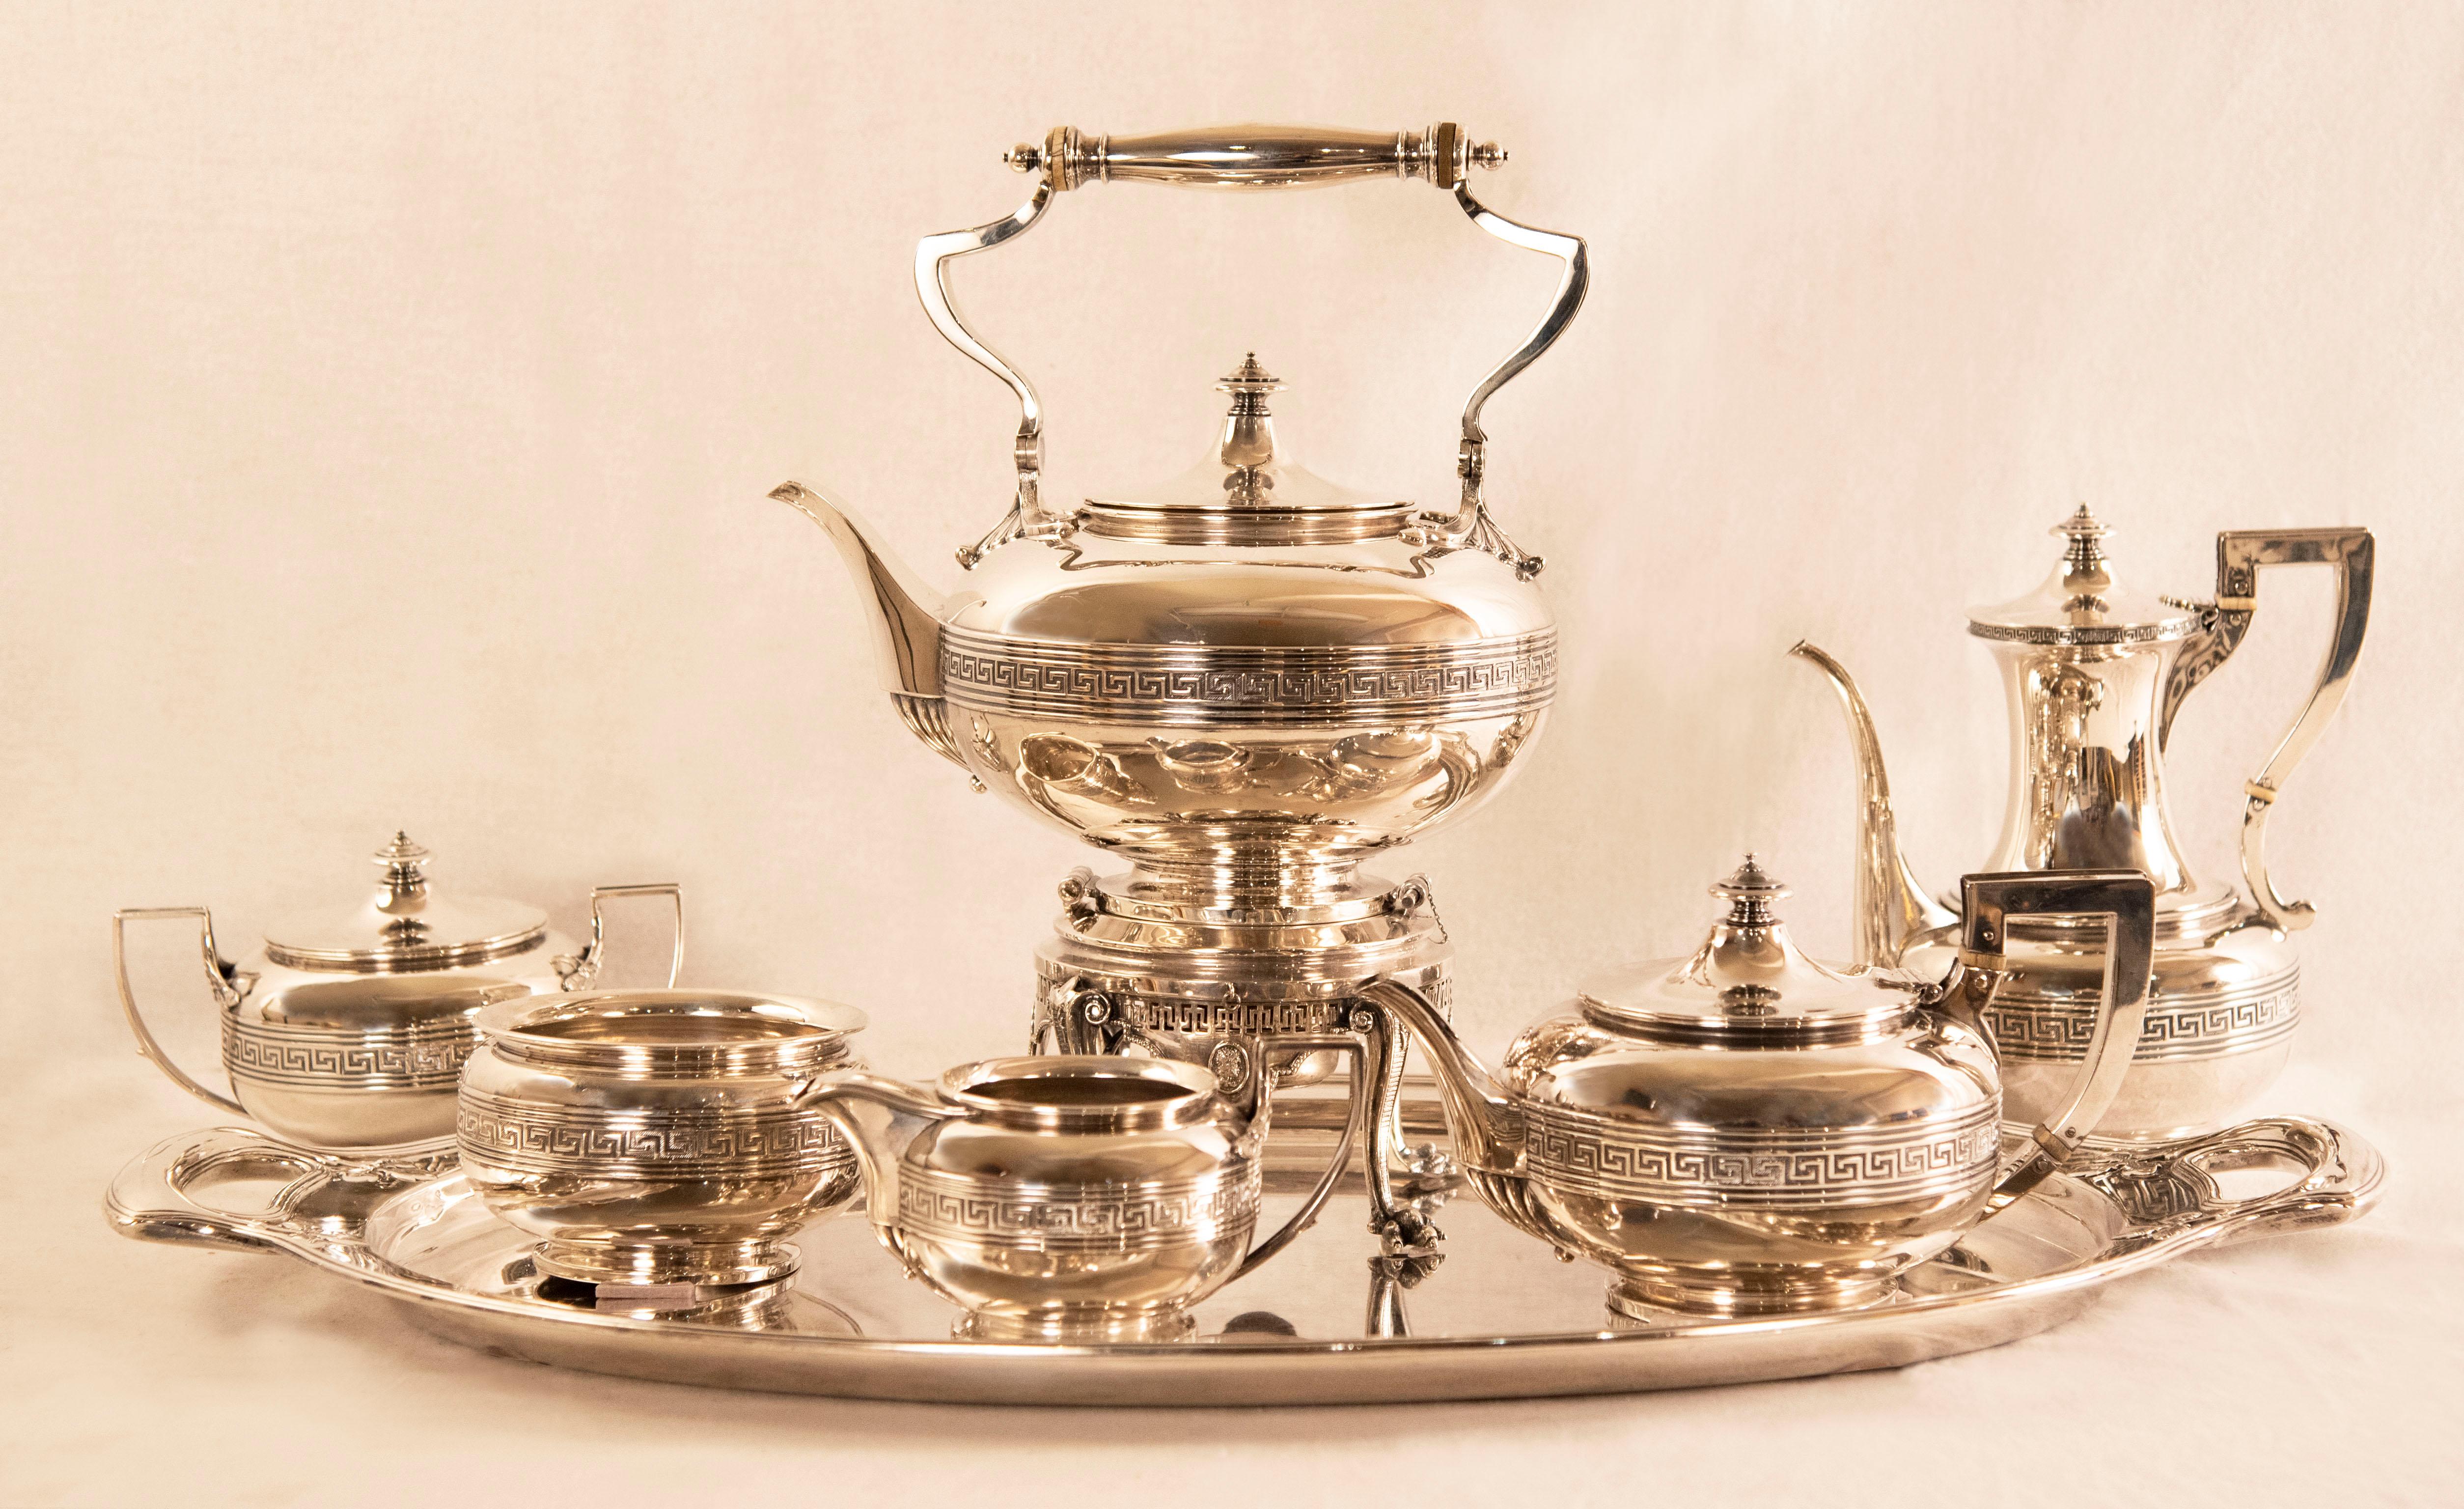 Tiffany tea and coffee English sterling silver set
6 pieces and silver tray included.